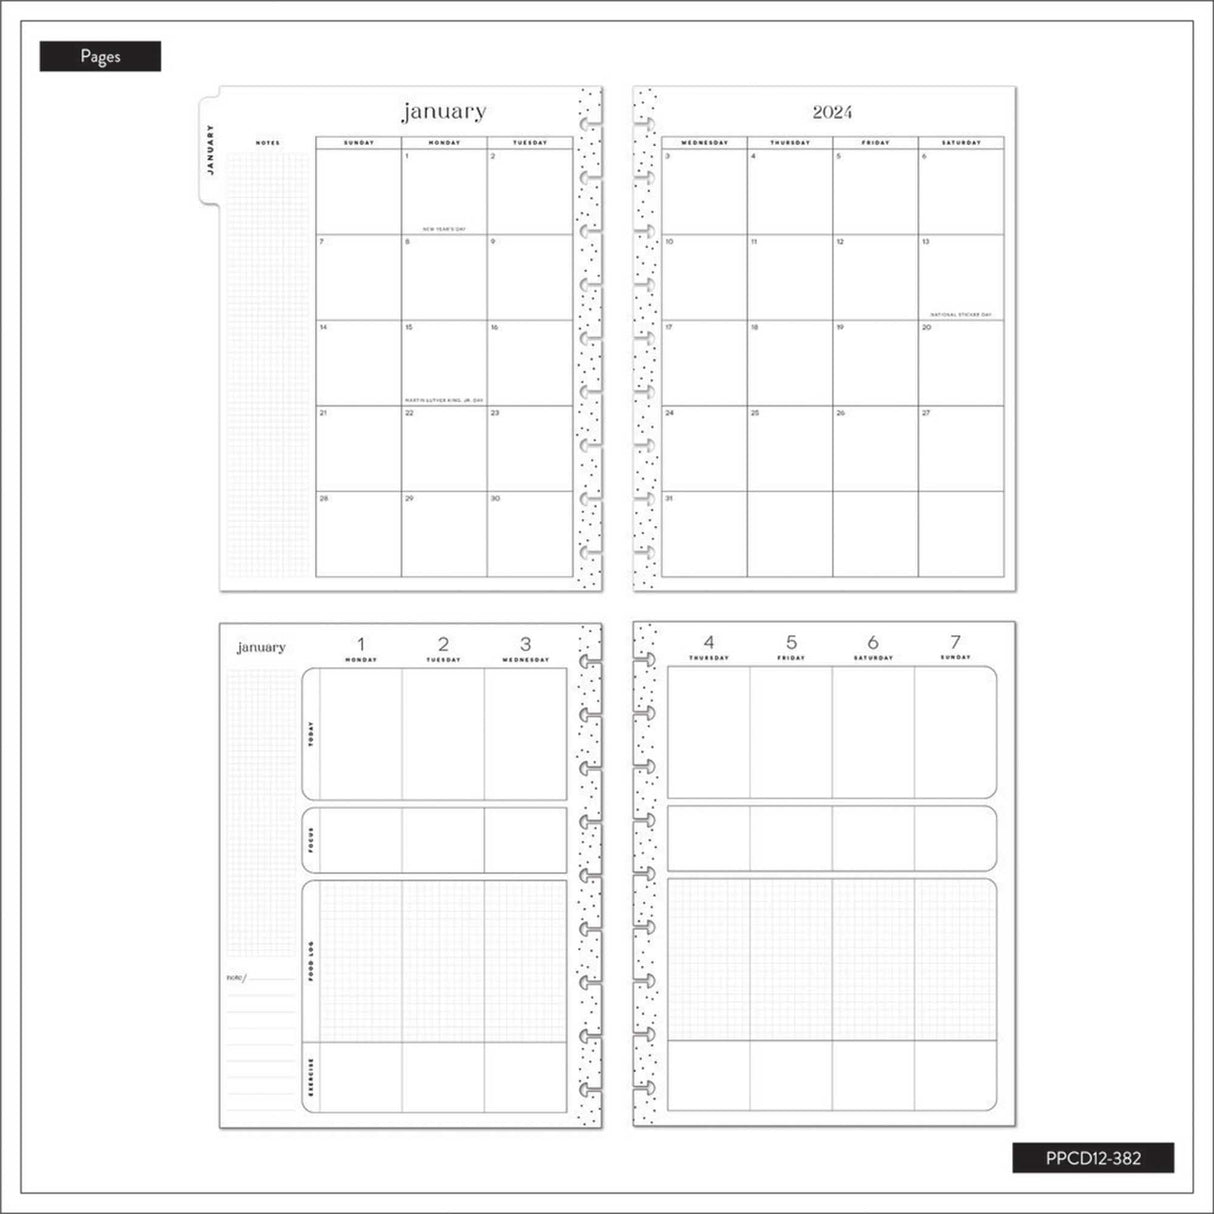 Happy Planner CLASSIC Be Bold - Fitness 12-Months Dated Jan - Dec 2024